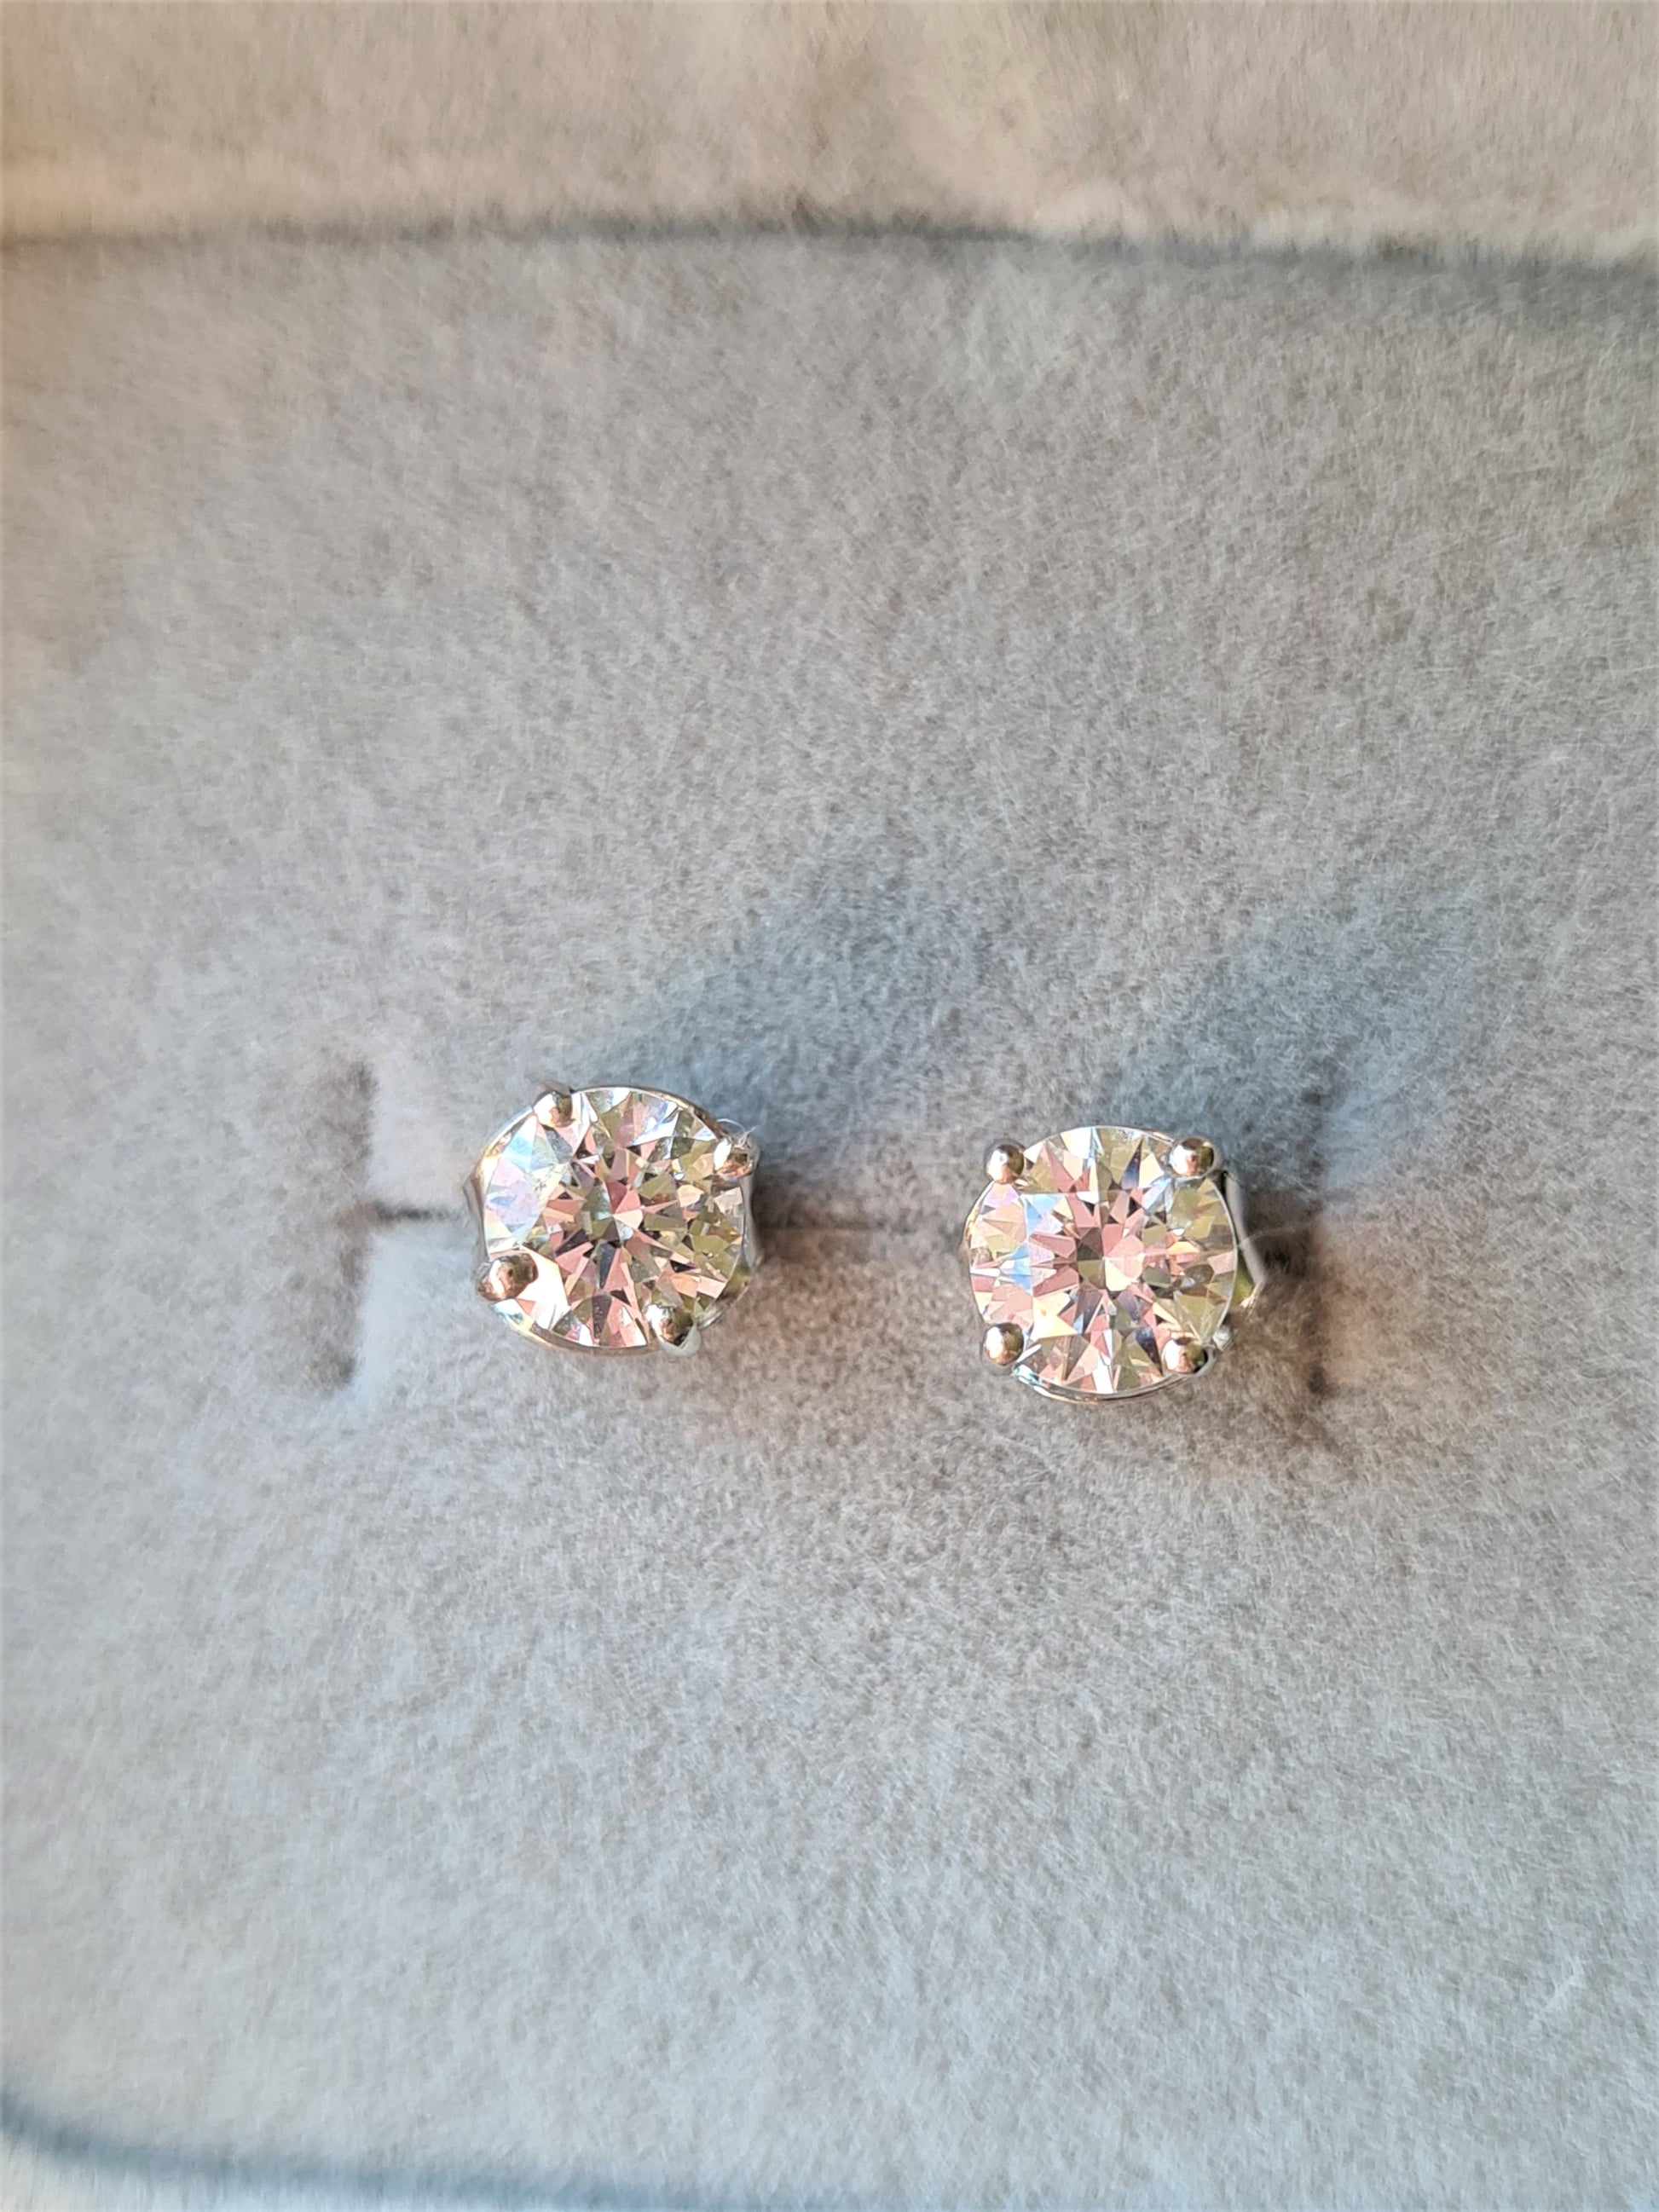 White Finish Swarovski Zirconia Earrings In Sterling Silver Design by Diosa  Paris Jewellery at Pernia's Pop Up Shop 2024